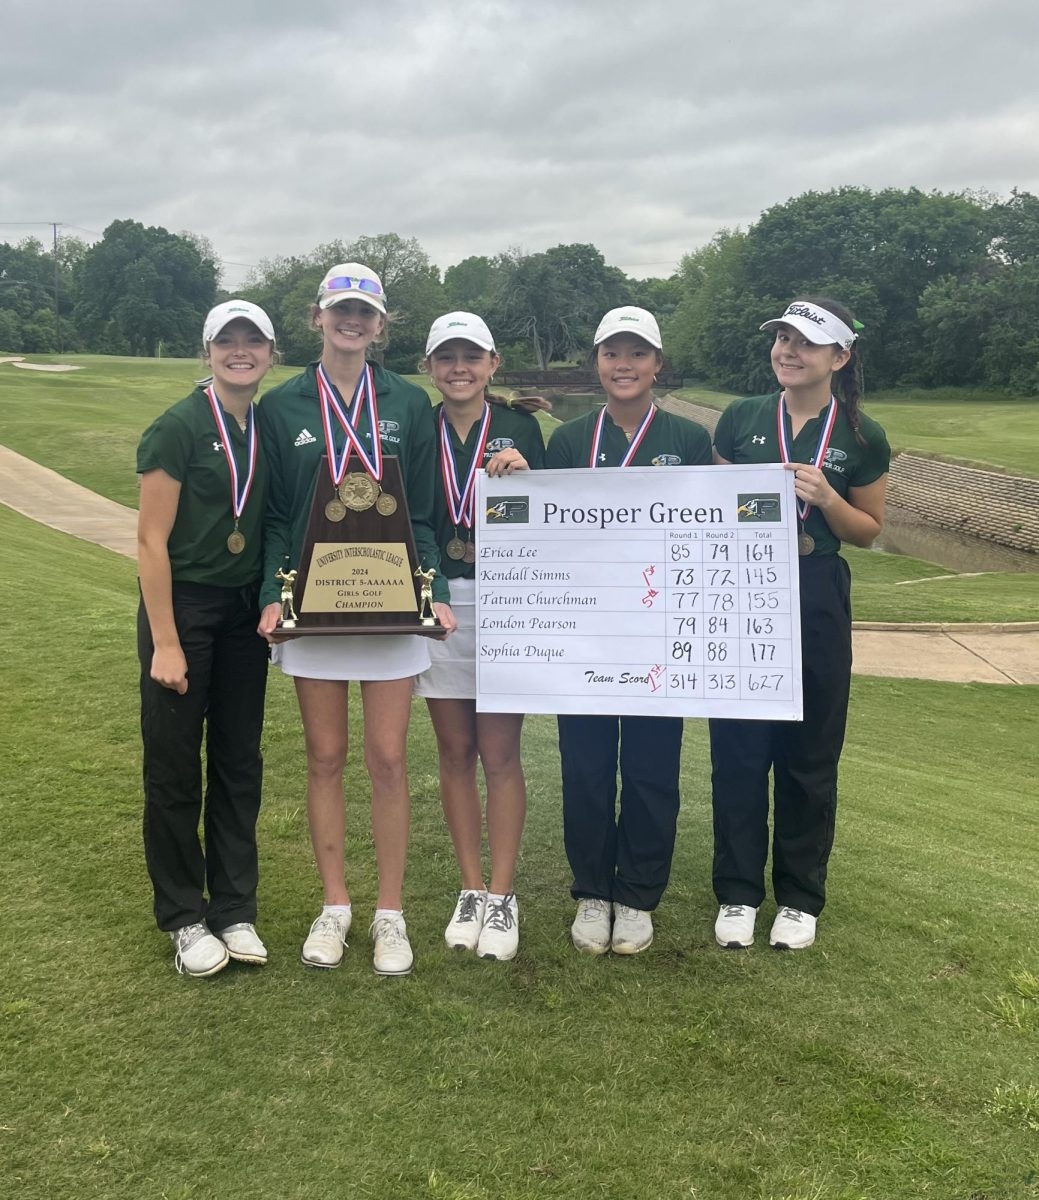 After+golf+regionals%2C+sophomore+Erica+Lee%2C+junior+Kendall+Simms%2C+freshman+Tatum+Churchman%2C+freshman+London+Pearson+and+junior+Sophia+Duque+present+their+scores.+The+team+finished+fifth+and+were+district+champions.+Churchman+led+with+a+score+of+71.+